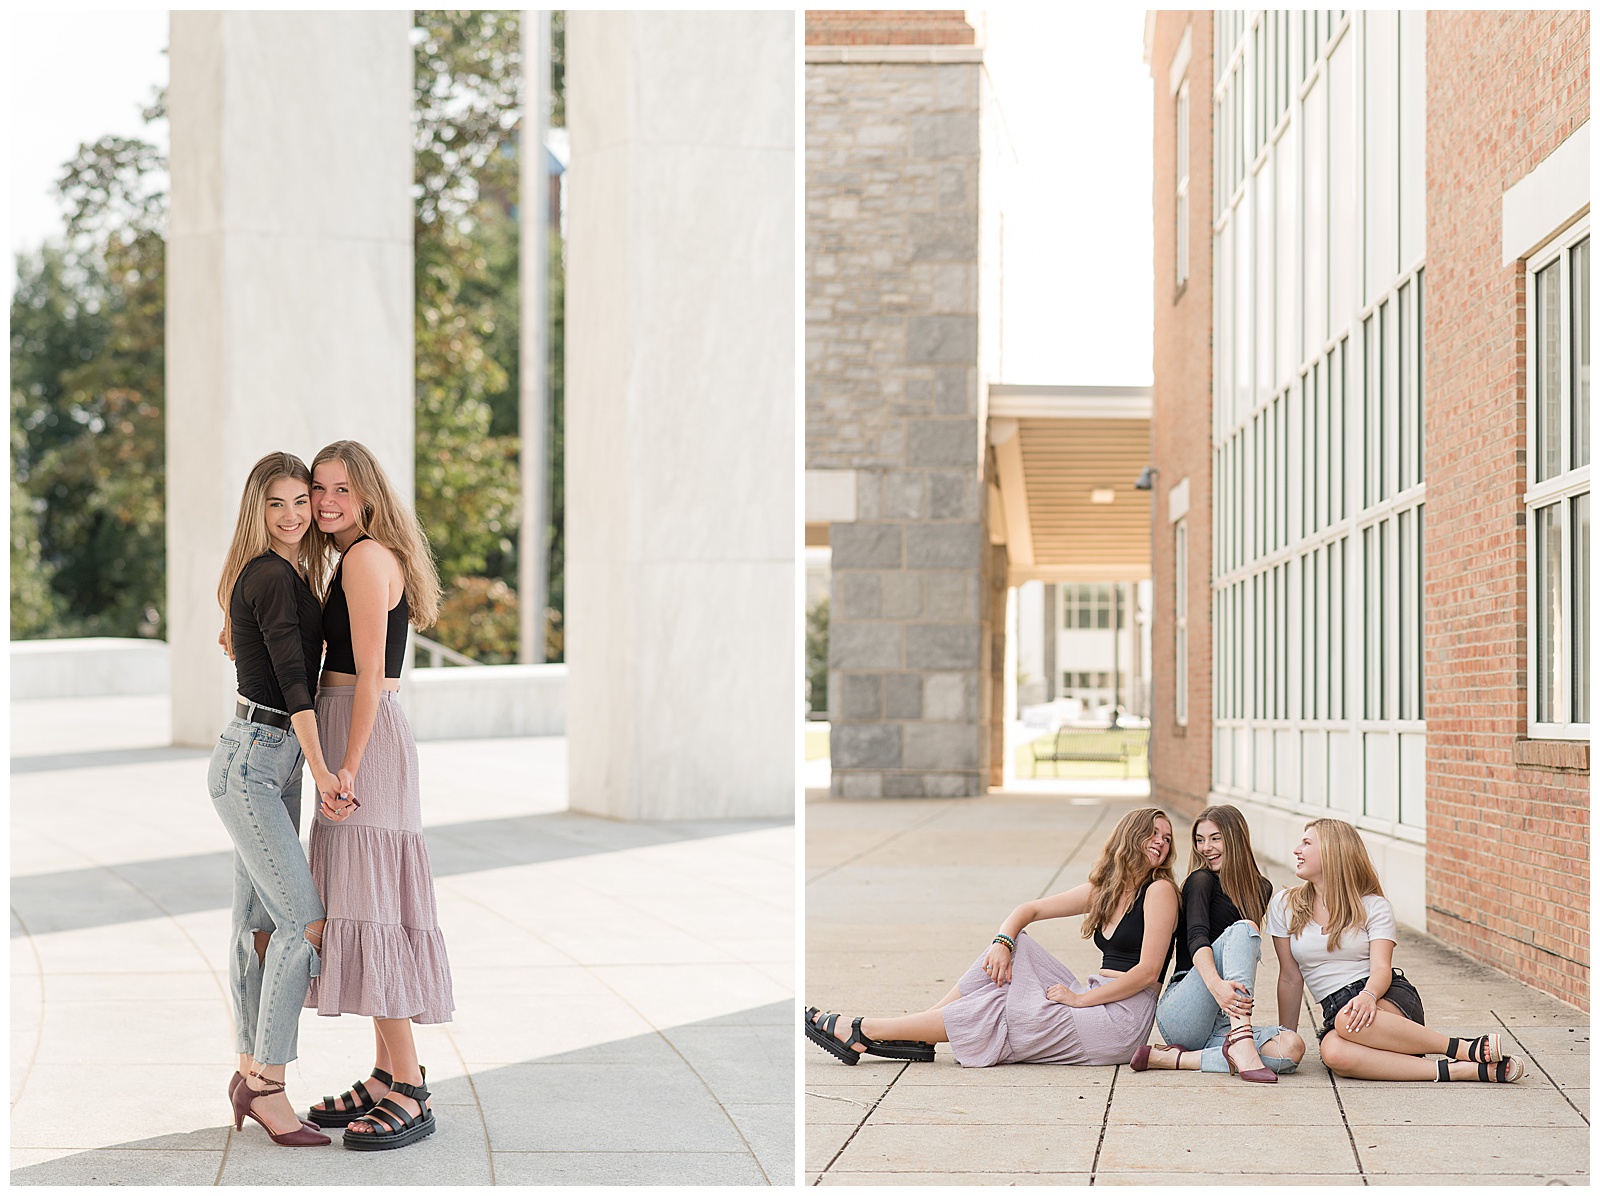 senior girls sitting together and smiling at each other on concrete sidewalk with building behind them